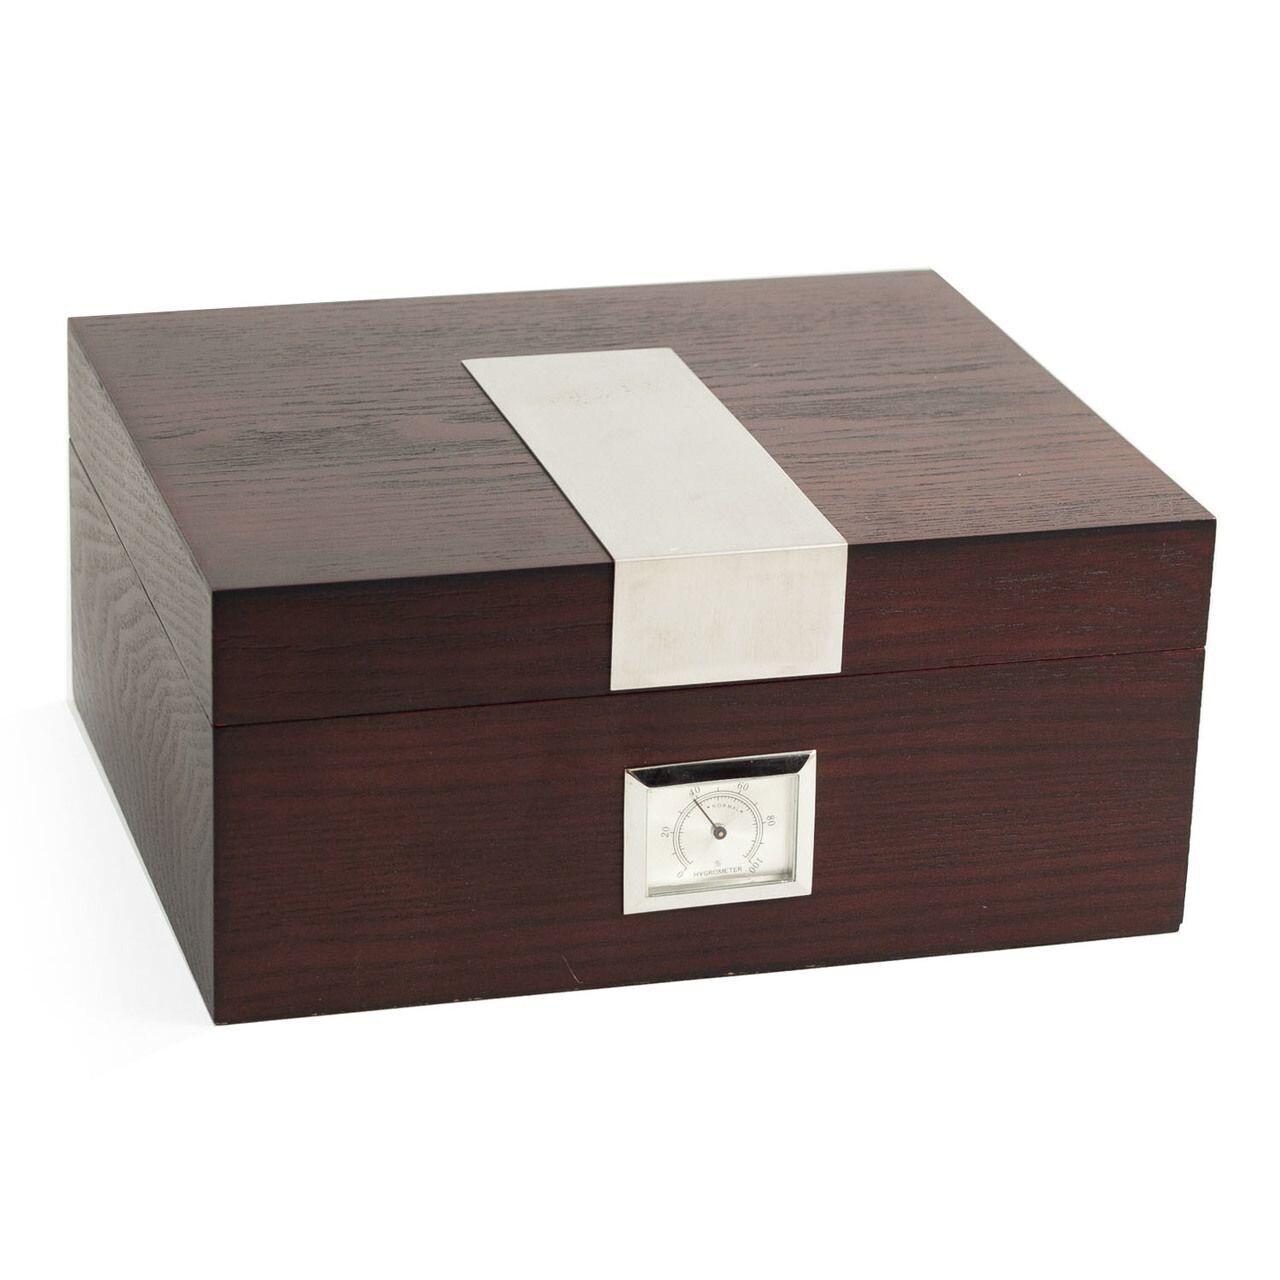 C412 Wood & Stainless Humidor